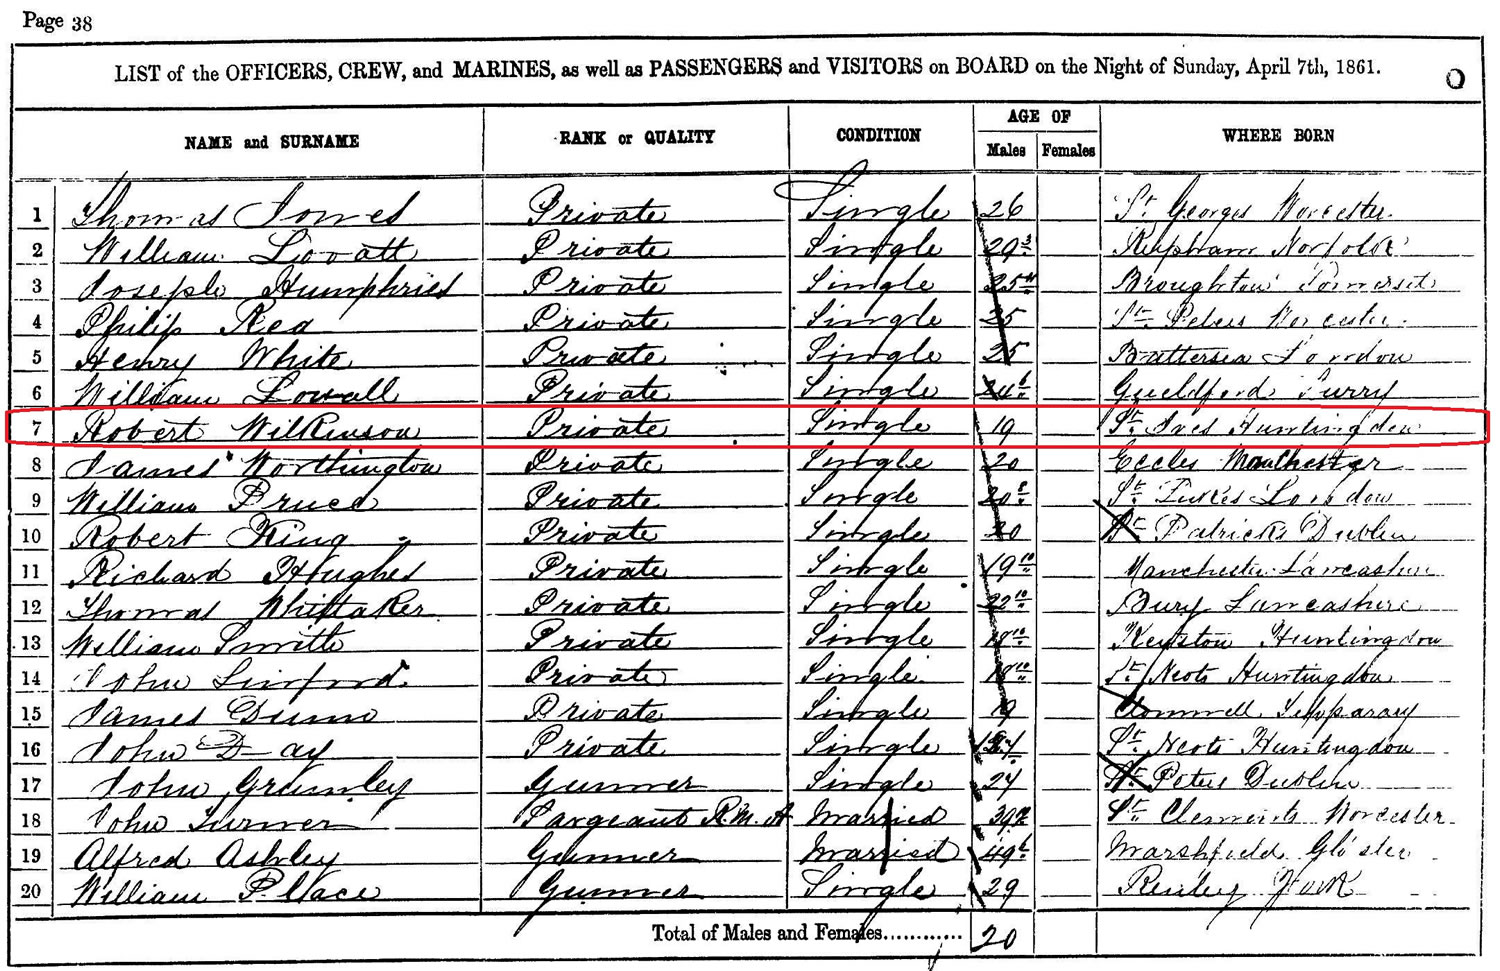 1861 census of shipping: HMS London "at sea in the Grecian Archipelago"